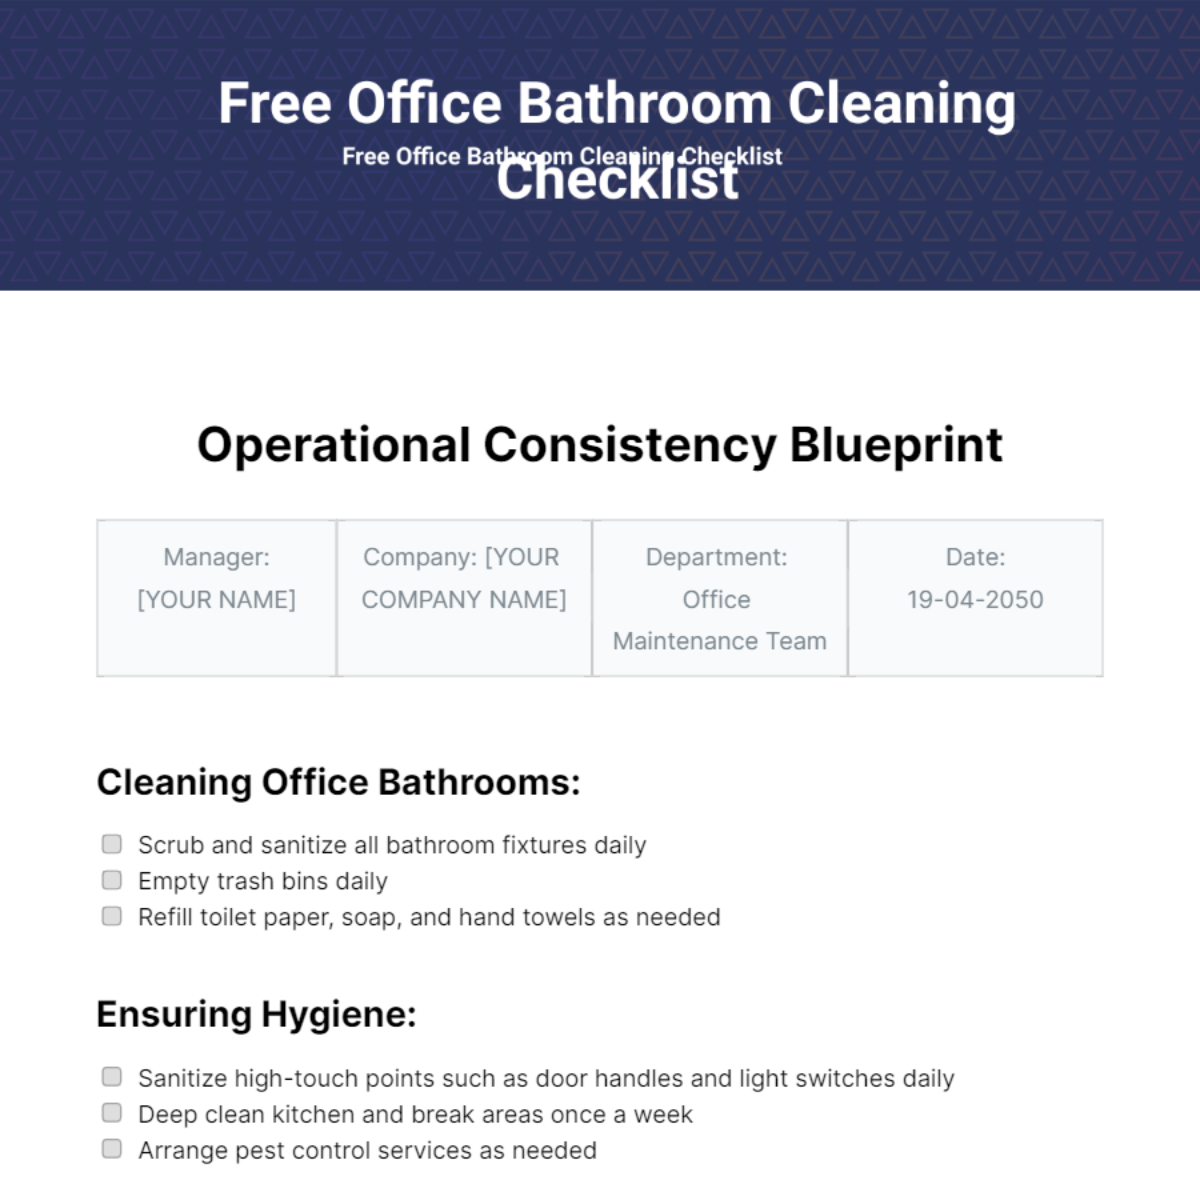 Office Bathroom Cleaning Checklist Template